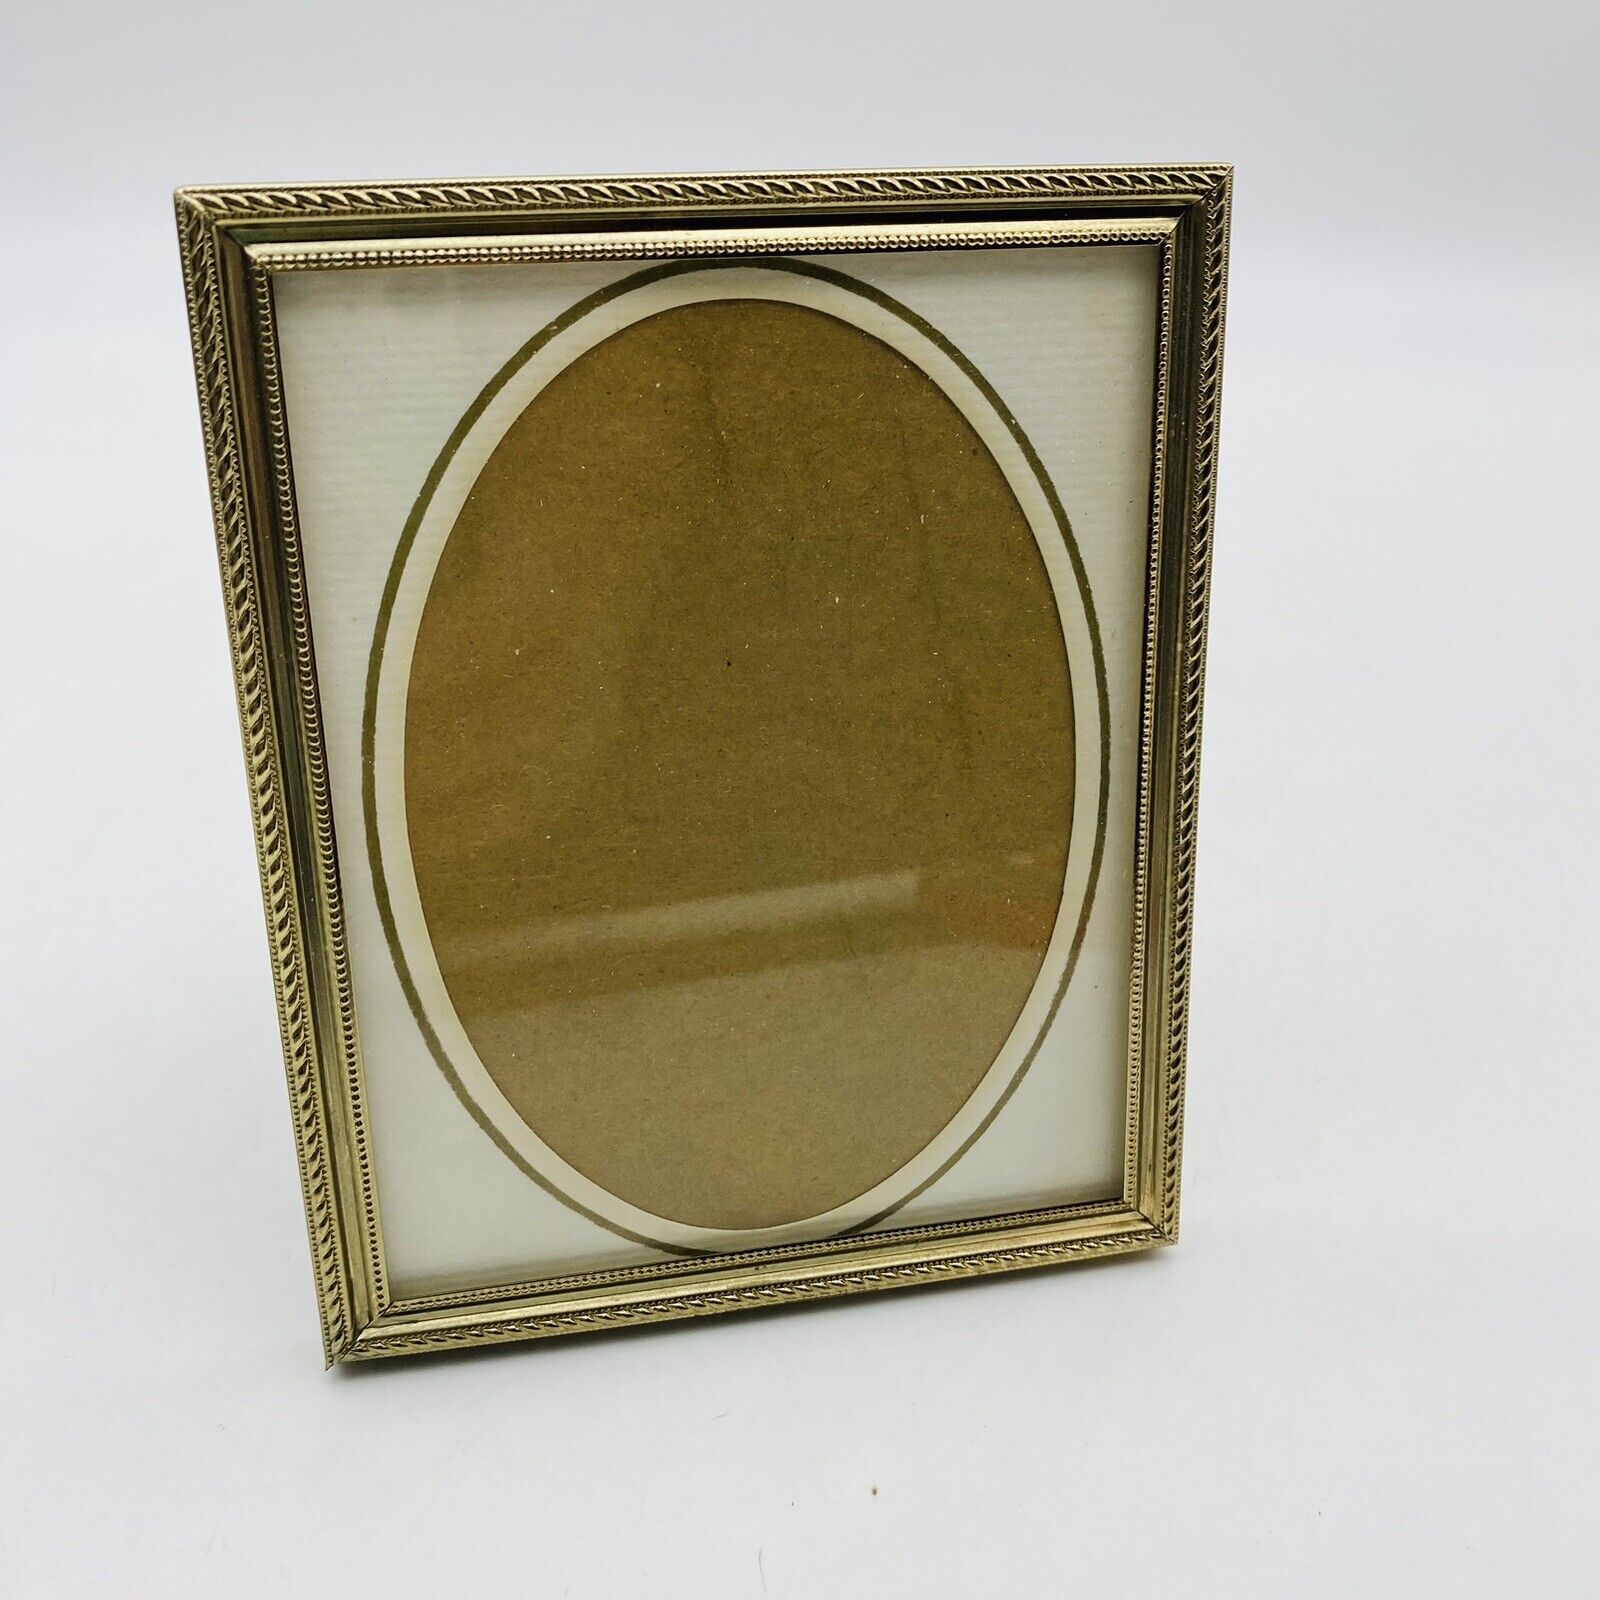 Vintage Gold Tone Photo Frame W/ Oval Mating for Table or Wall Under Glass 